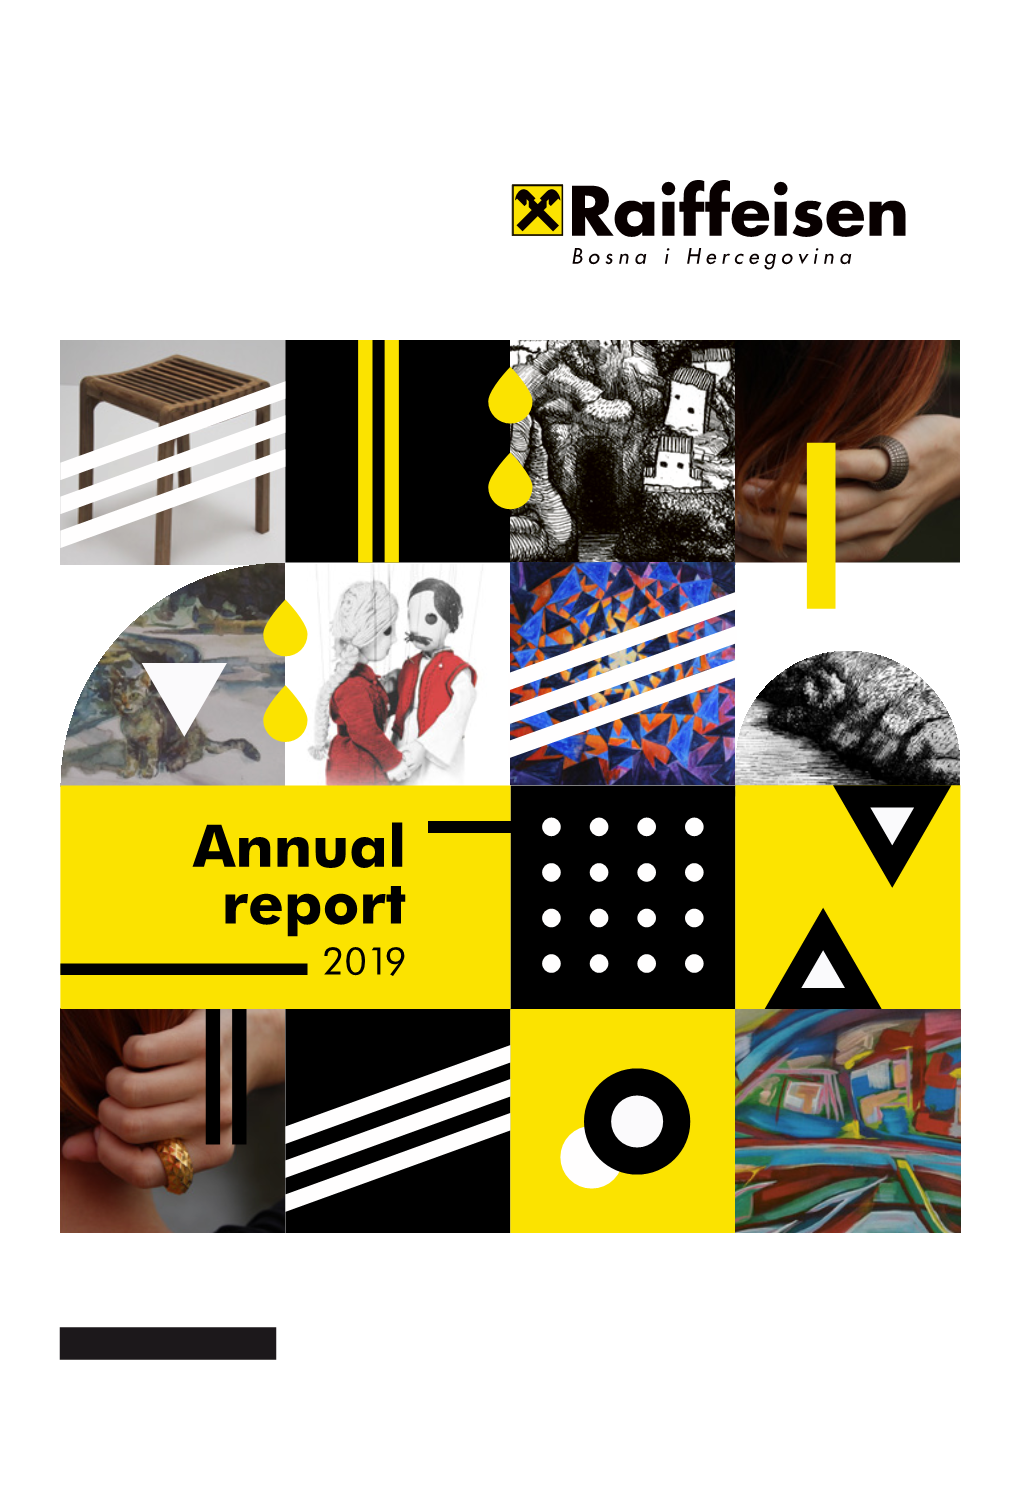 Annual Report 2019 Survey of Key Data